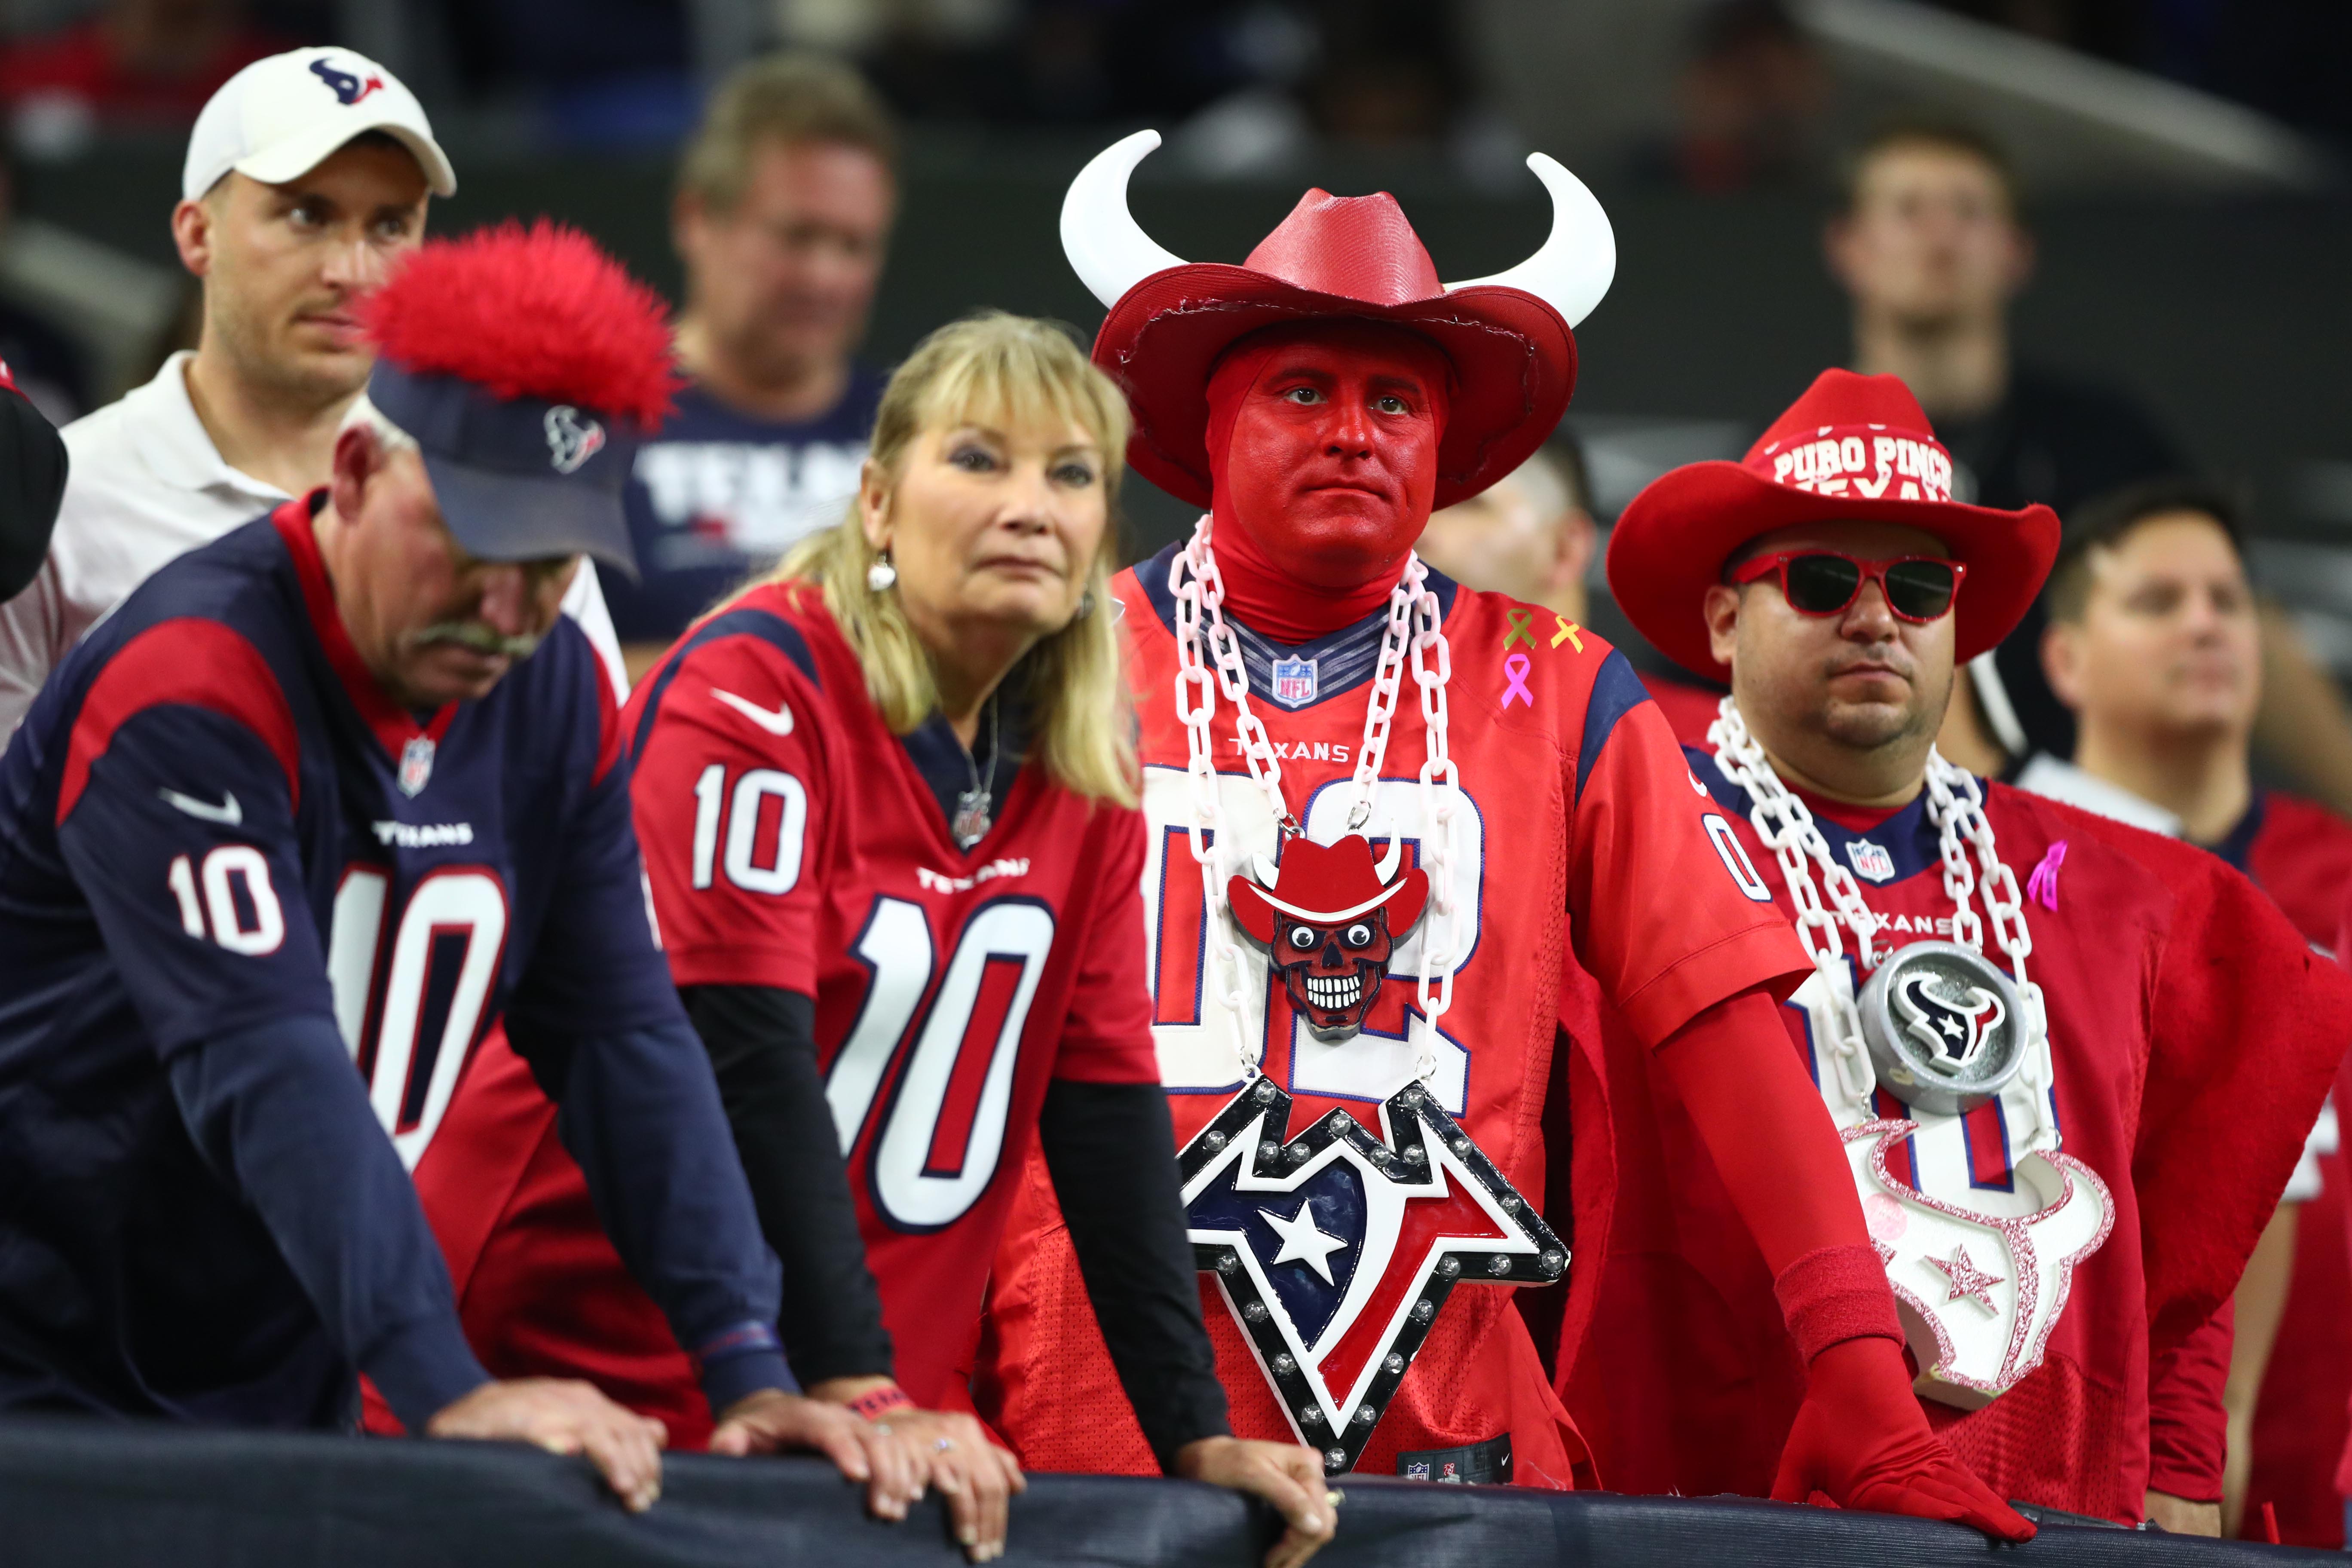 Houston Texans fans during the AFC Wild Card playoff football game against the Indianapolis Colts, Jan. 5, 2019.